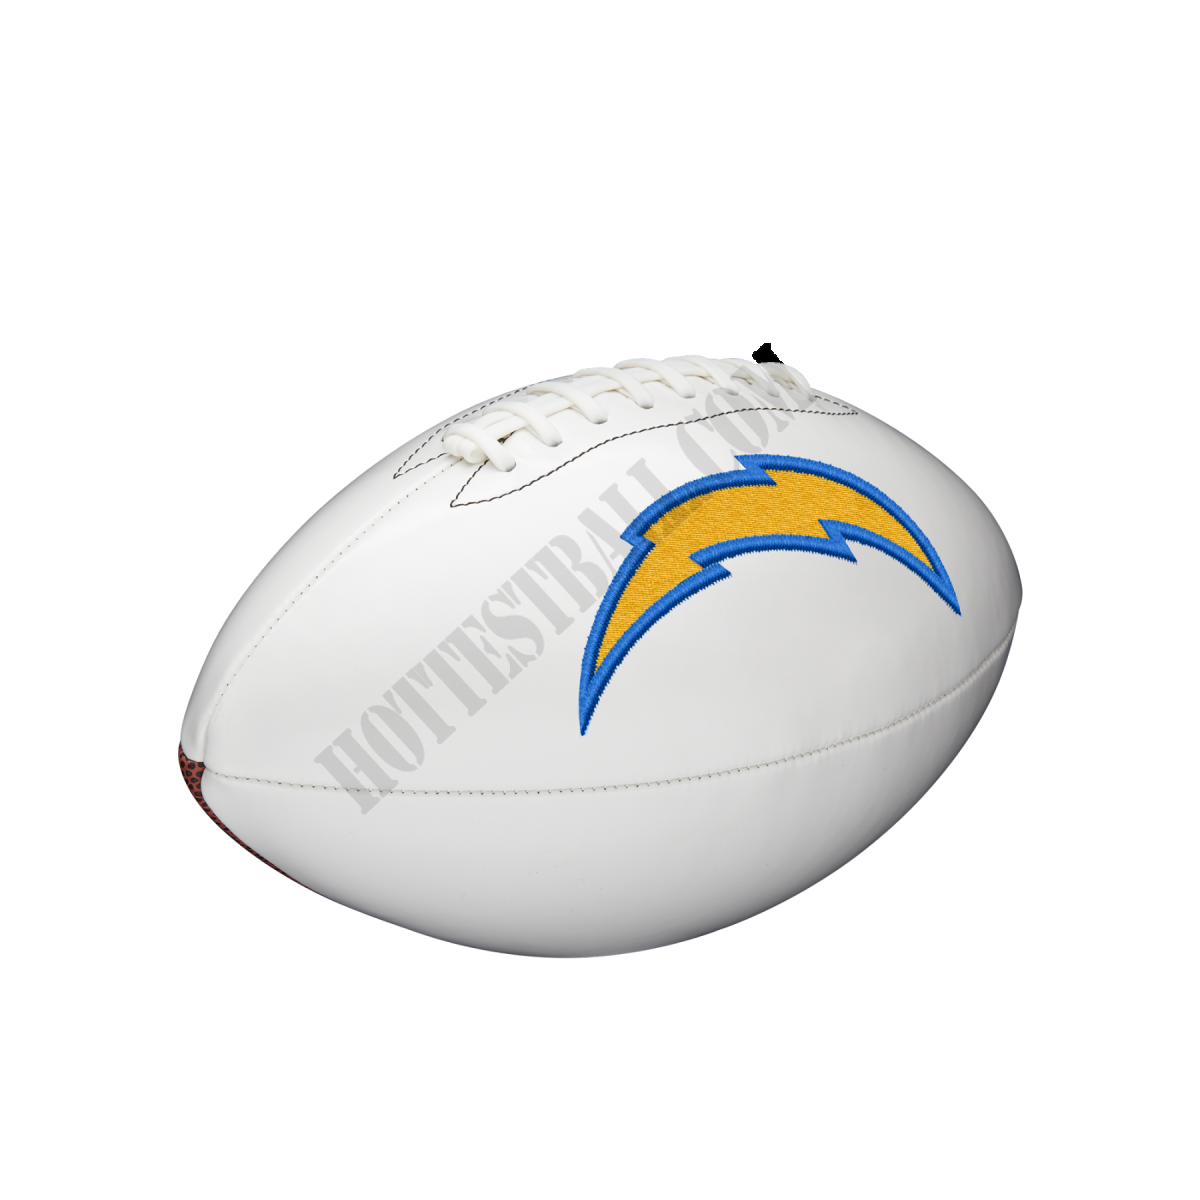 NFL Live Signature Autograph Football - Los Angeles Chargers - Wilson Discount Store - -3